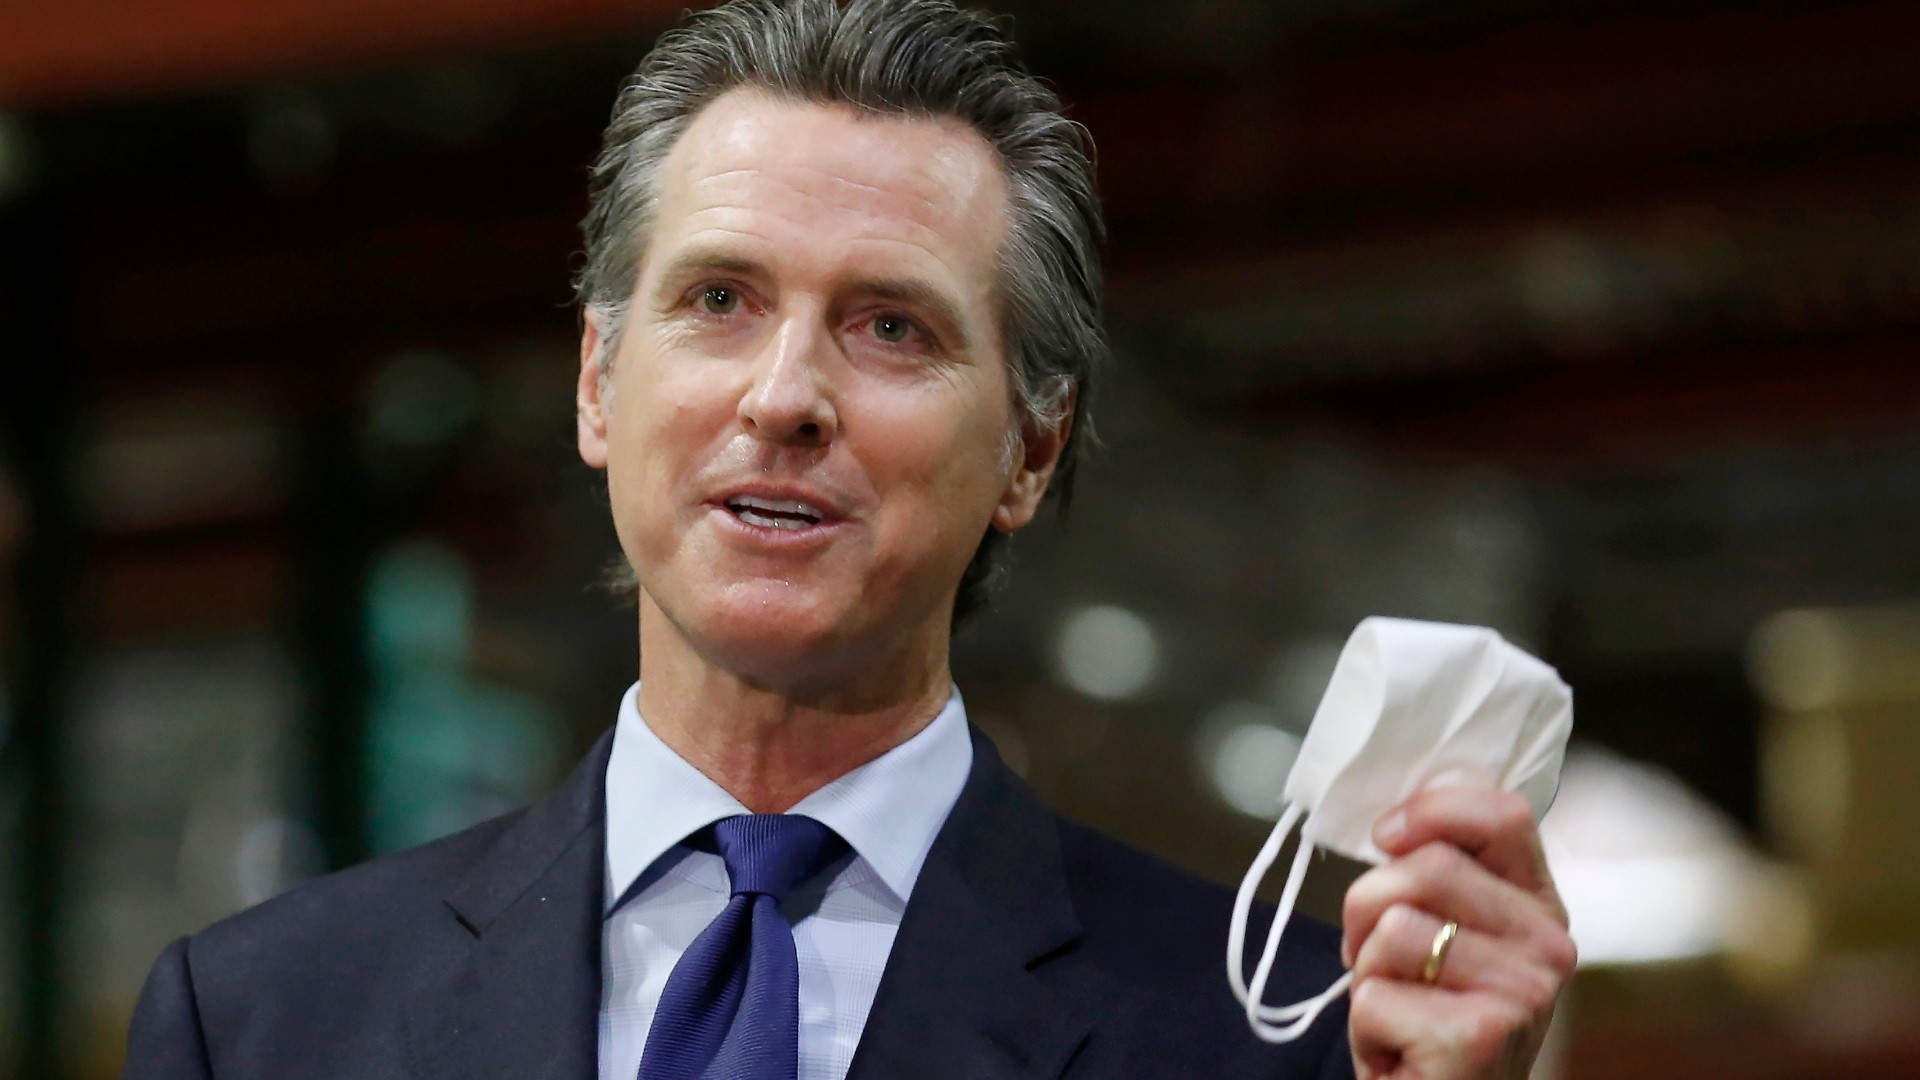 Gov. Gavin Newsom said his whole family tested negative for the coronavirus on Sunday but will still be quarantining for 14 days.